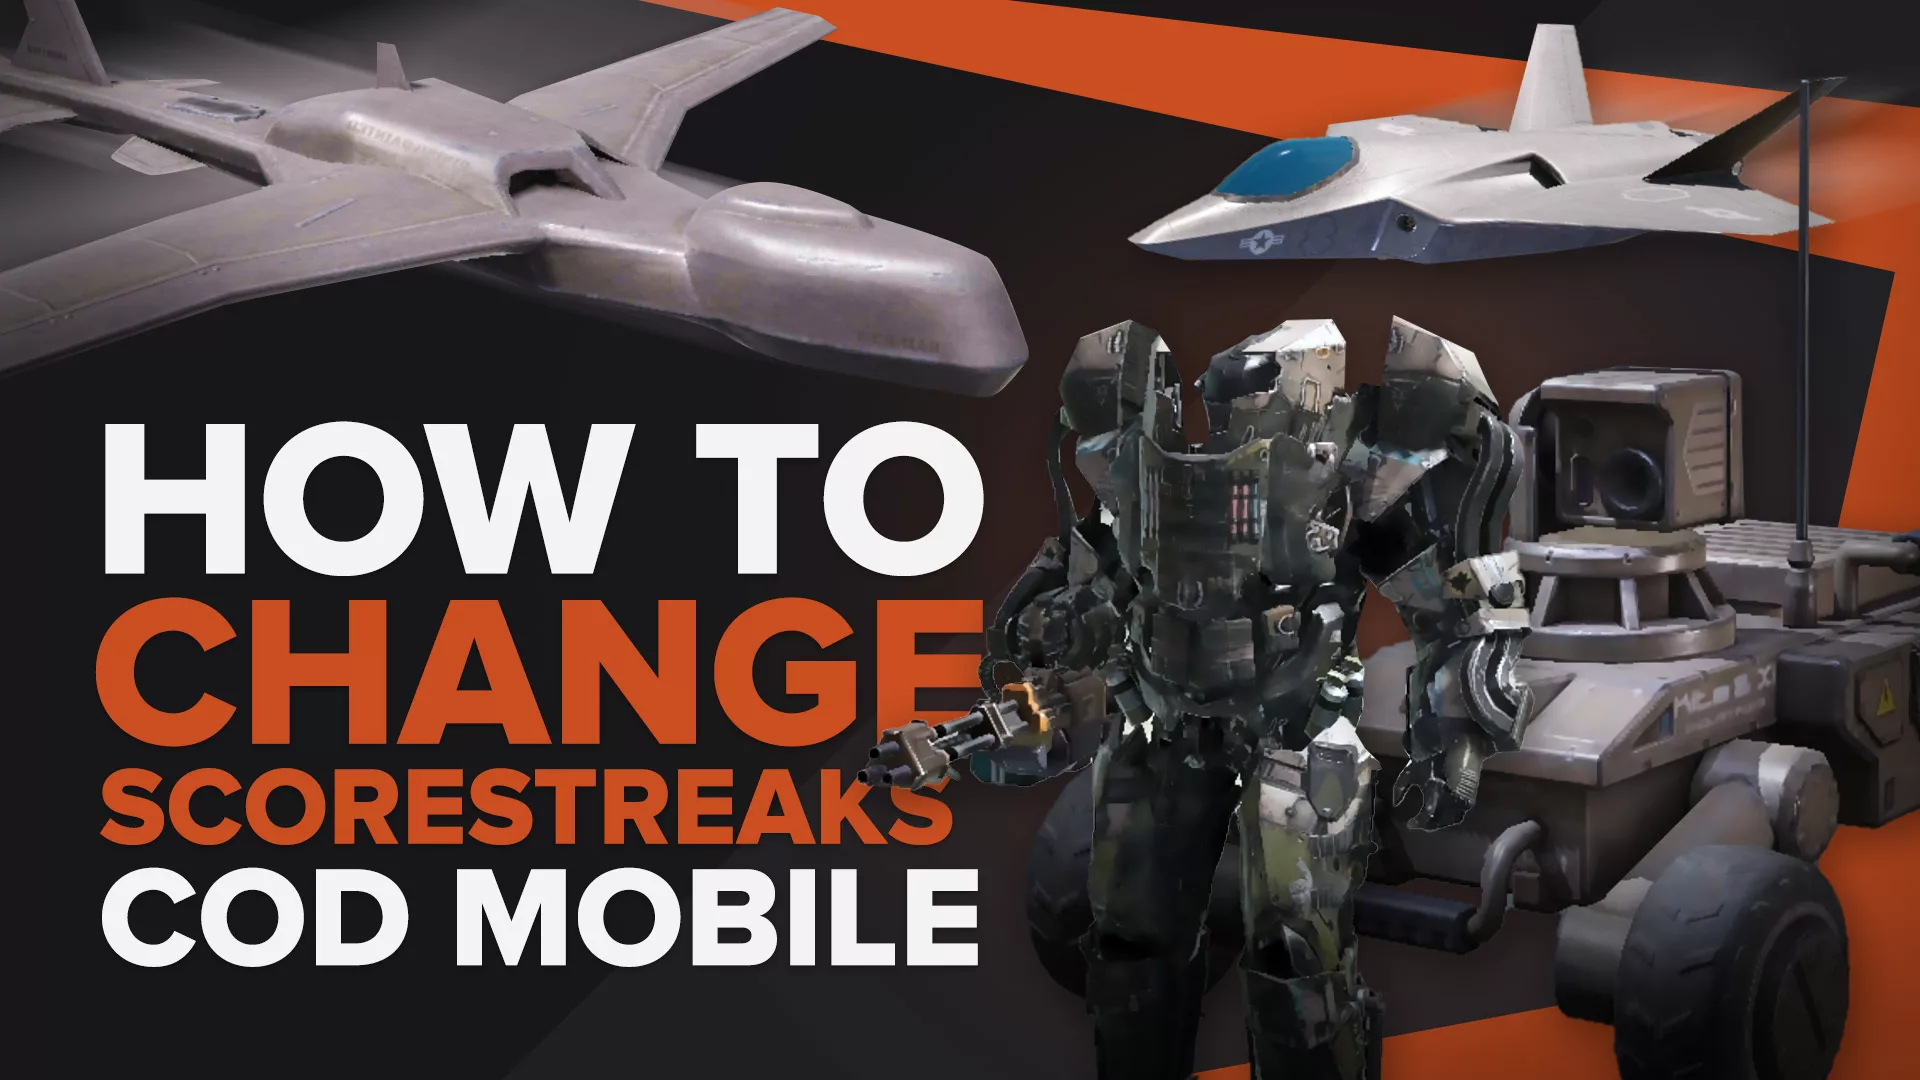 How to Equip or Change Scorestreaks in Call of Duty Mobile